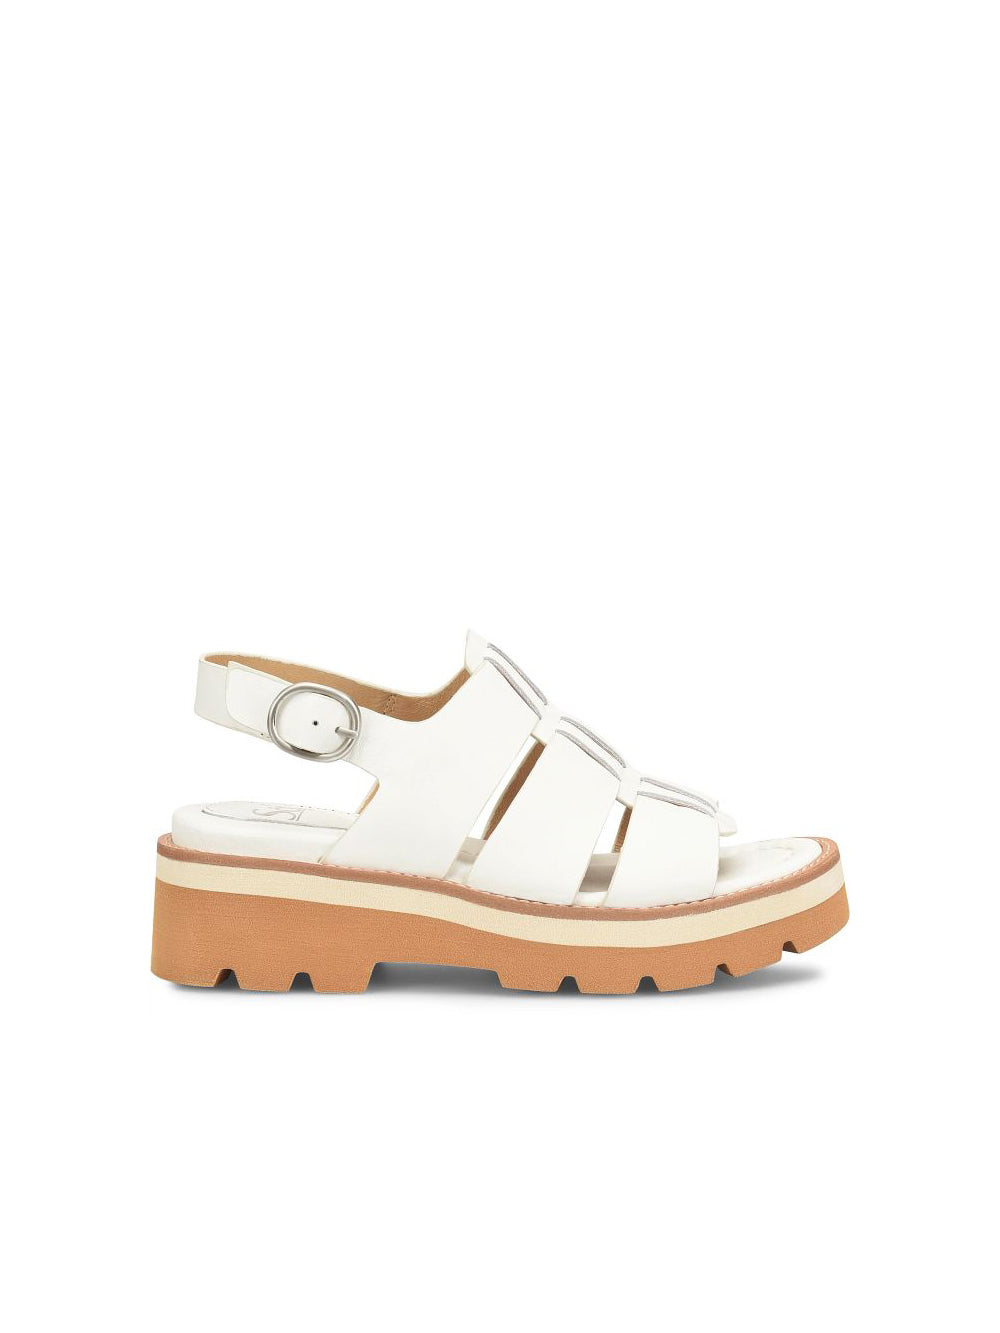 sofft shoes patrina lugg platform wedge sandal in white